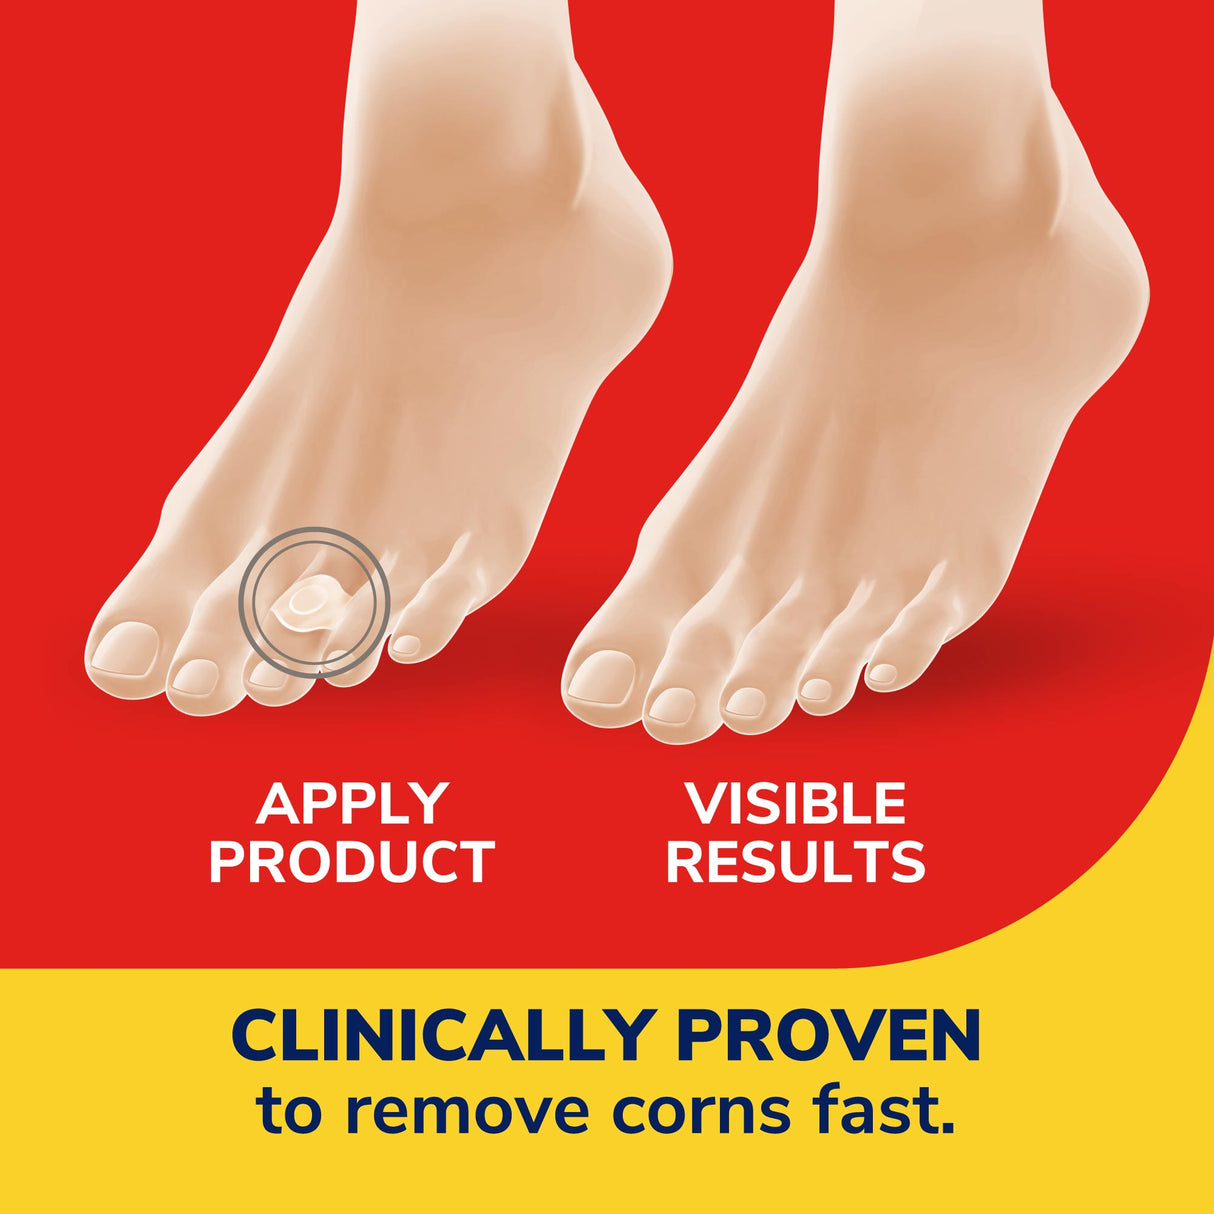 image of clinically proven to remove corns fast